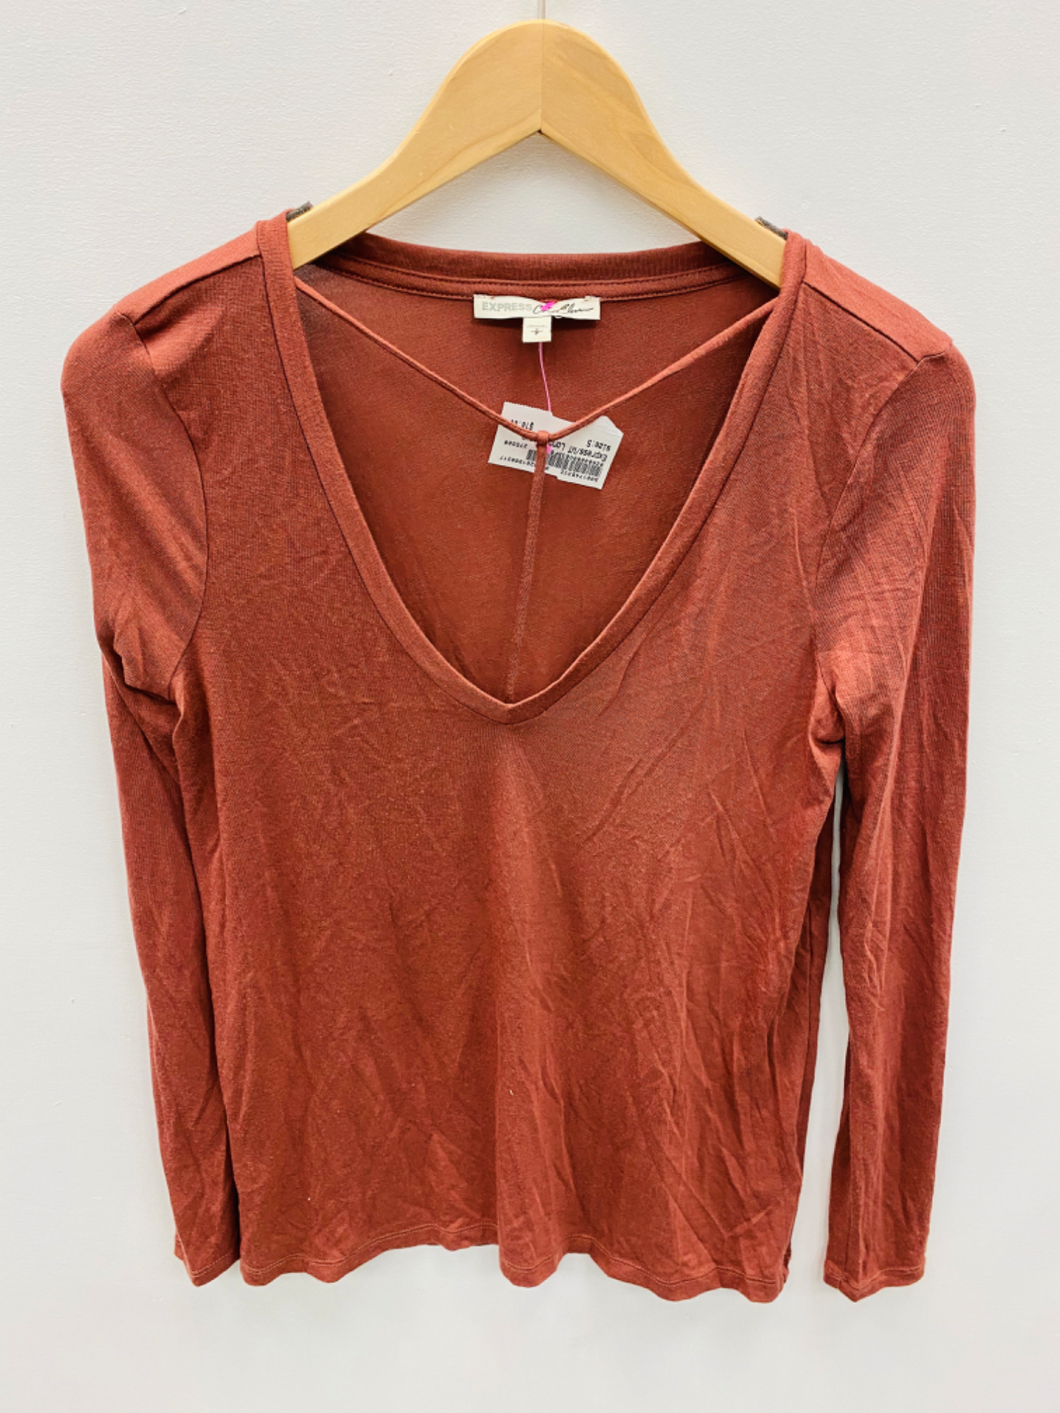 Express Long Sleeve Top Size Small